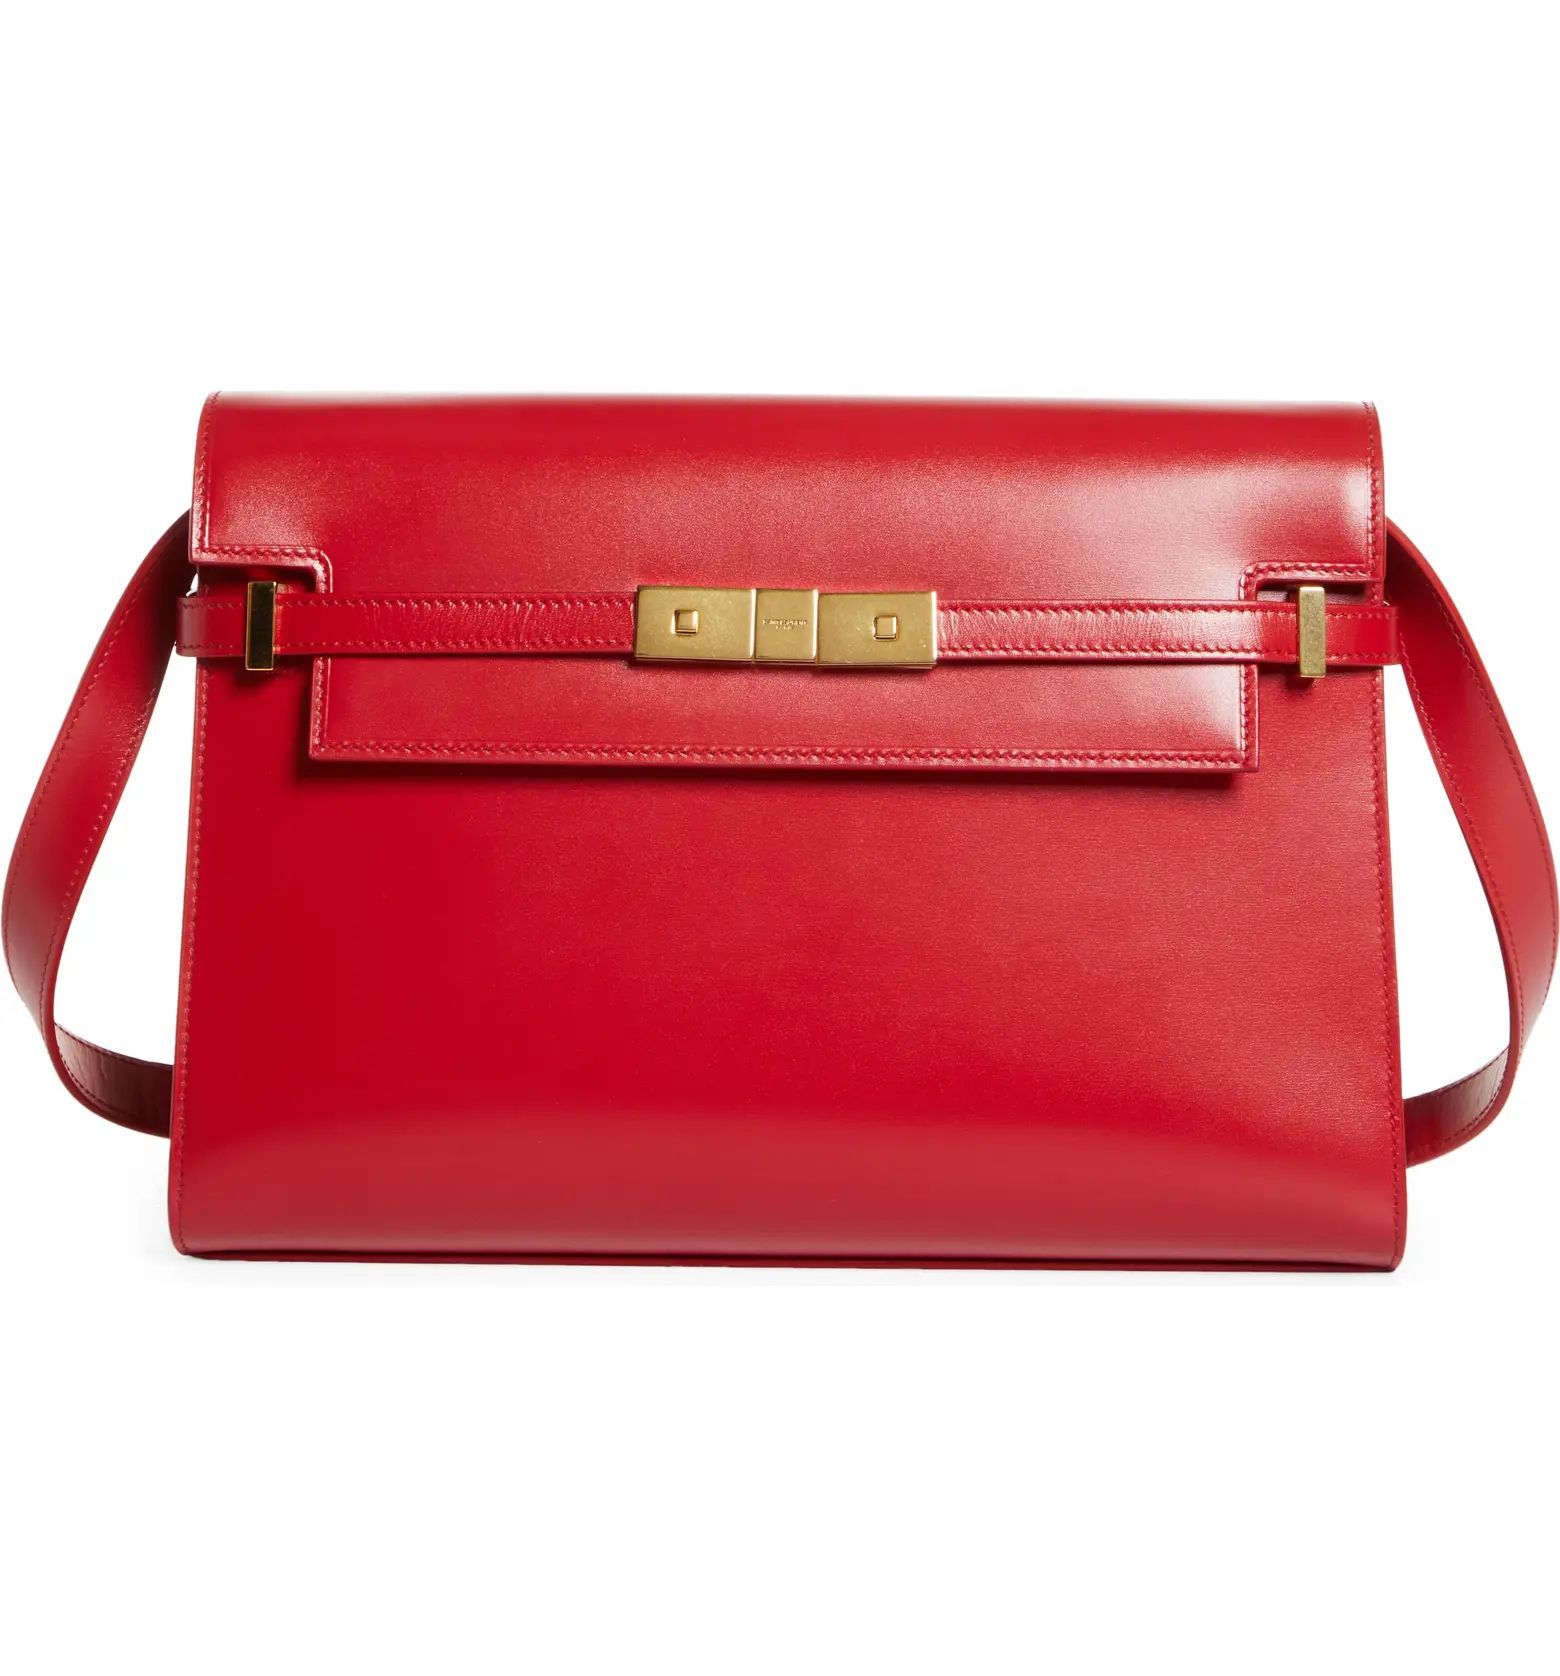 A Classic Crossbody Sling Bag for Women in Maroon: Sophie – Bicyclist:  Handmade Leather Goods